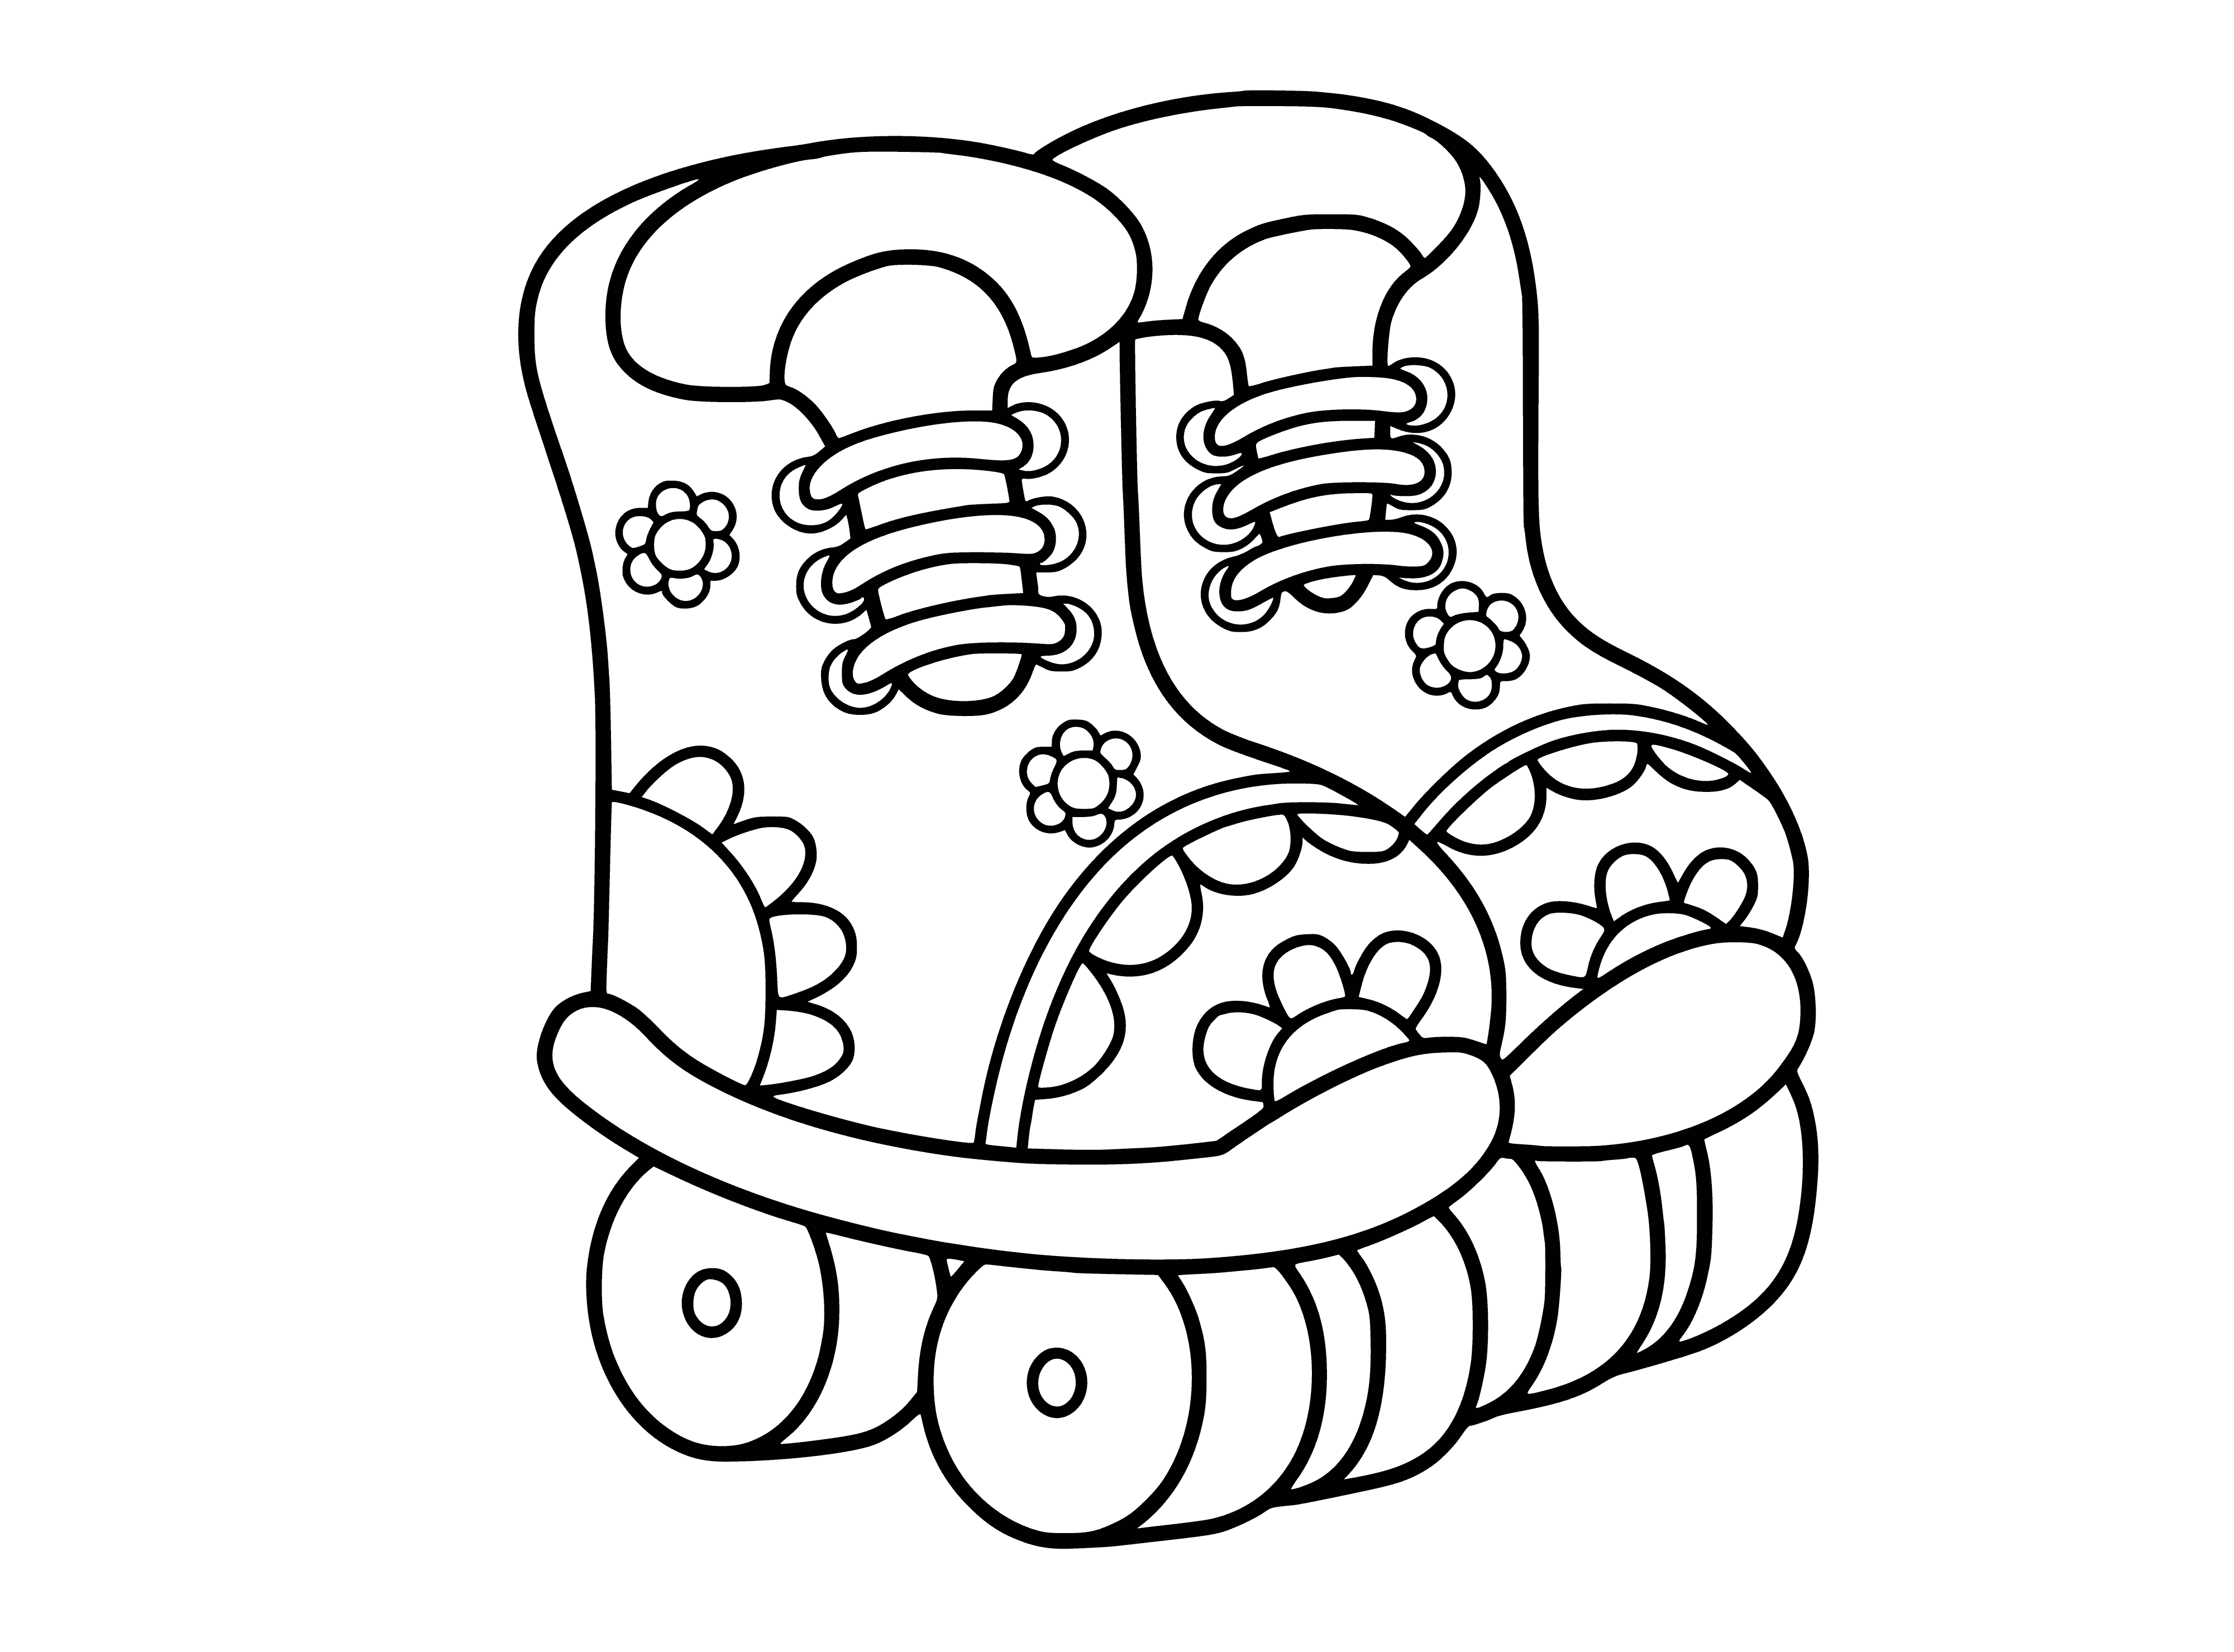 coloring page: 2 roller skates, 4 wheels each, black with white strap on top for feet. #coloringpage #rollerskates